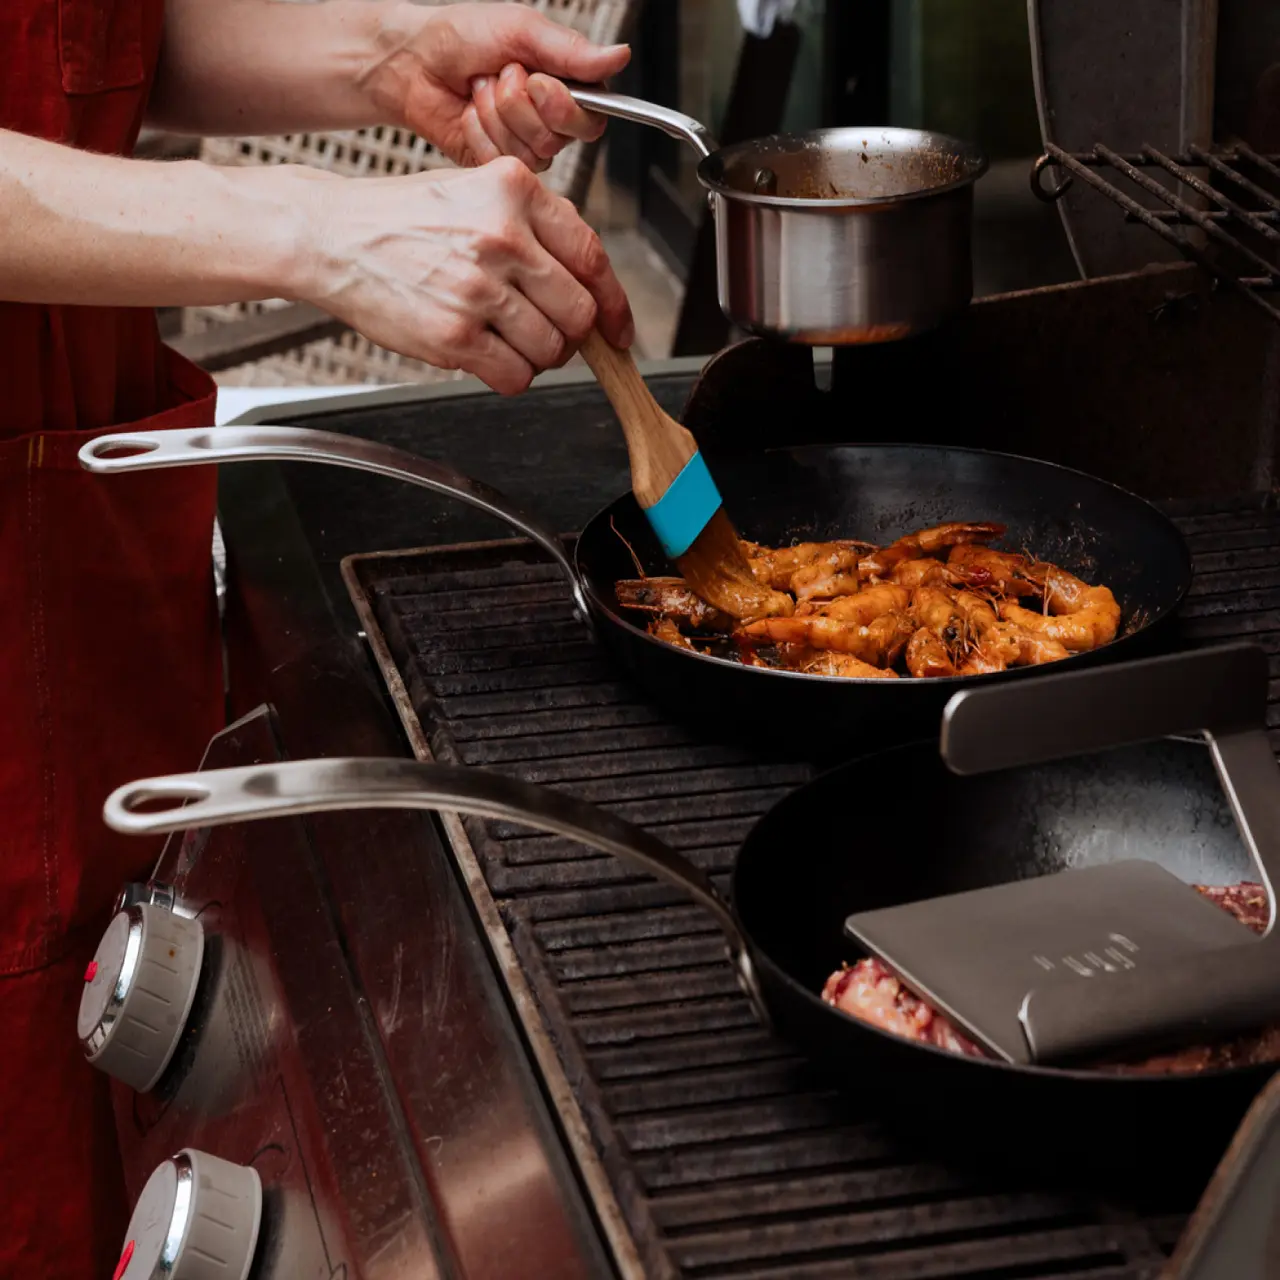 A person in a red apron is stirring shrimp in a skillet on a stove while other pots and pans are being heated nearby.